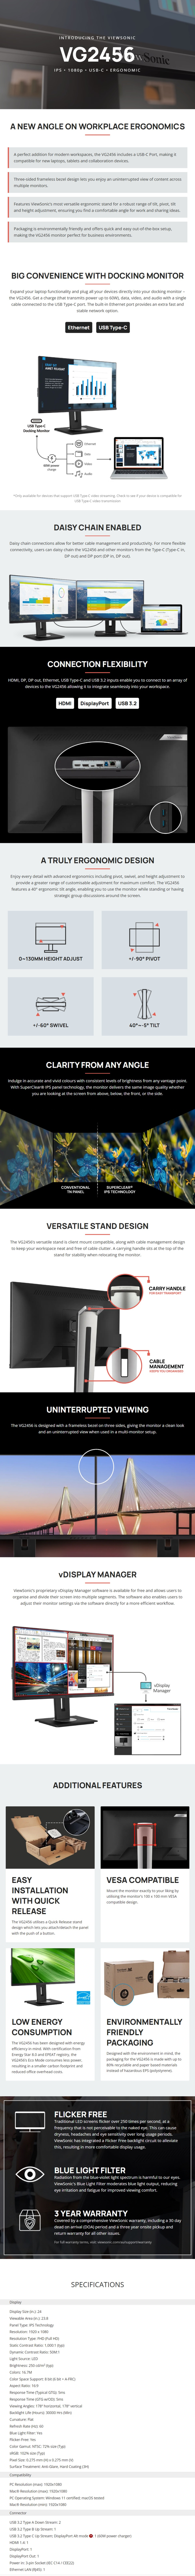 A large marketing image providing additional information about the product ViewSonic VG2456 24" FHD 60Hz IPS Monitor - Additional alt info not provided